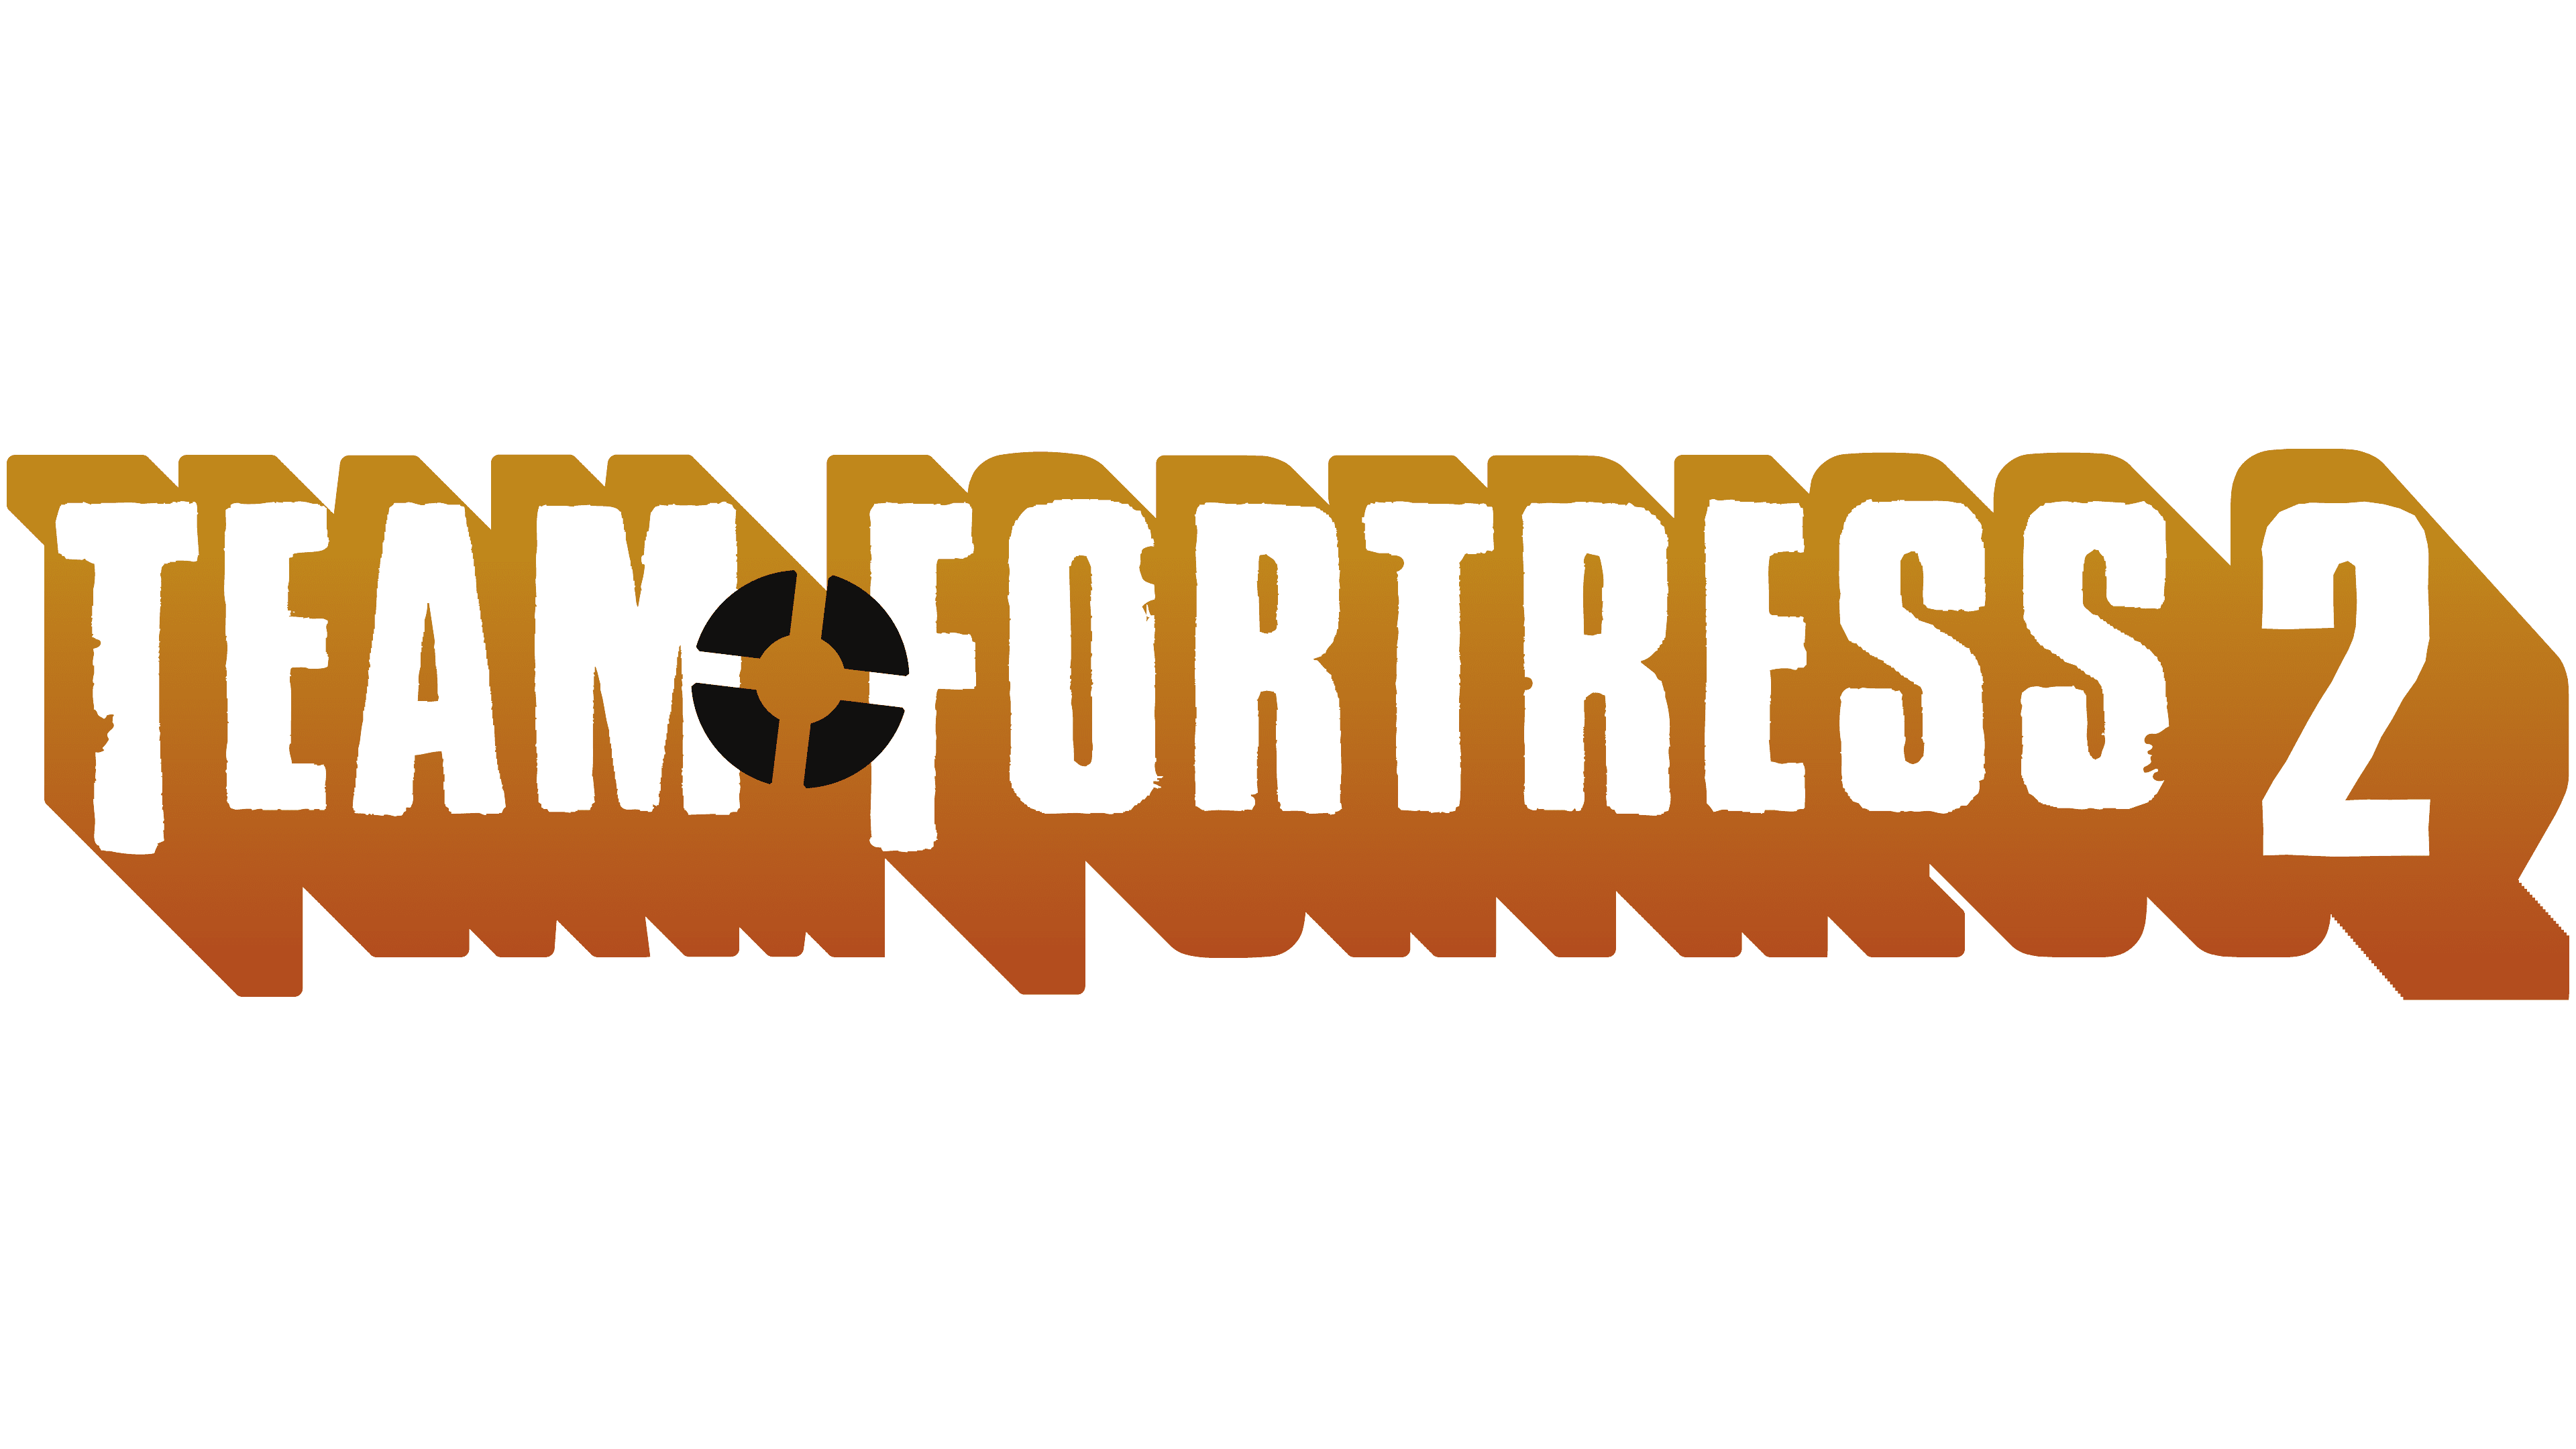 Team Fortress 2 logo and symbol, meaning, history, PNG